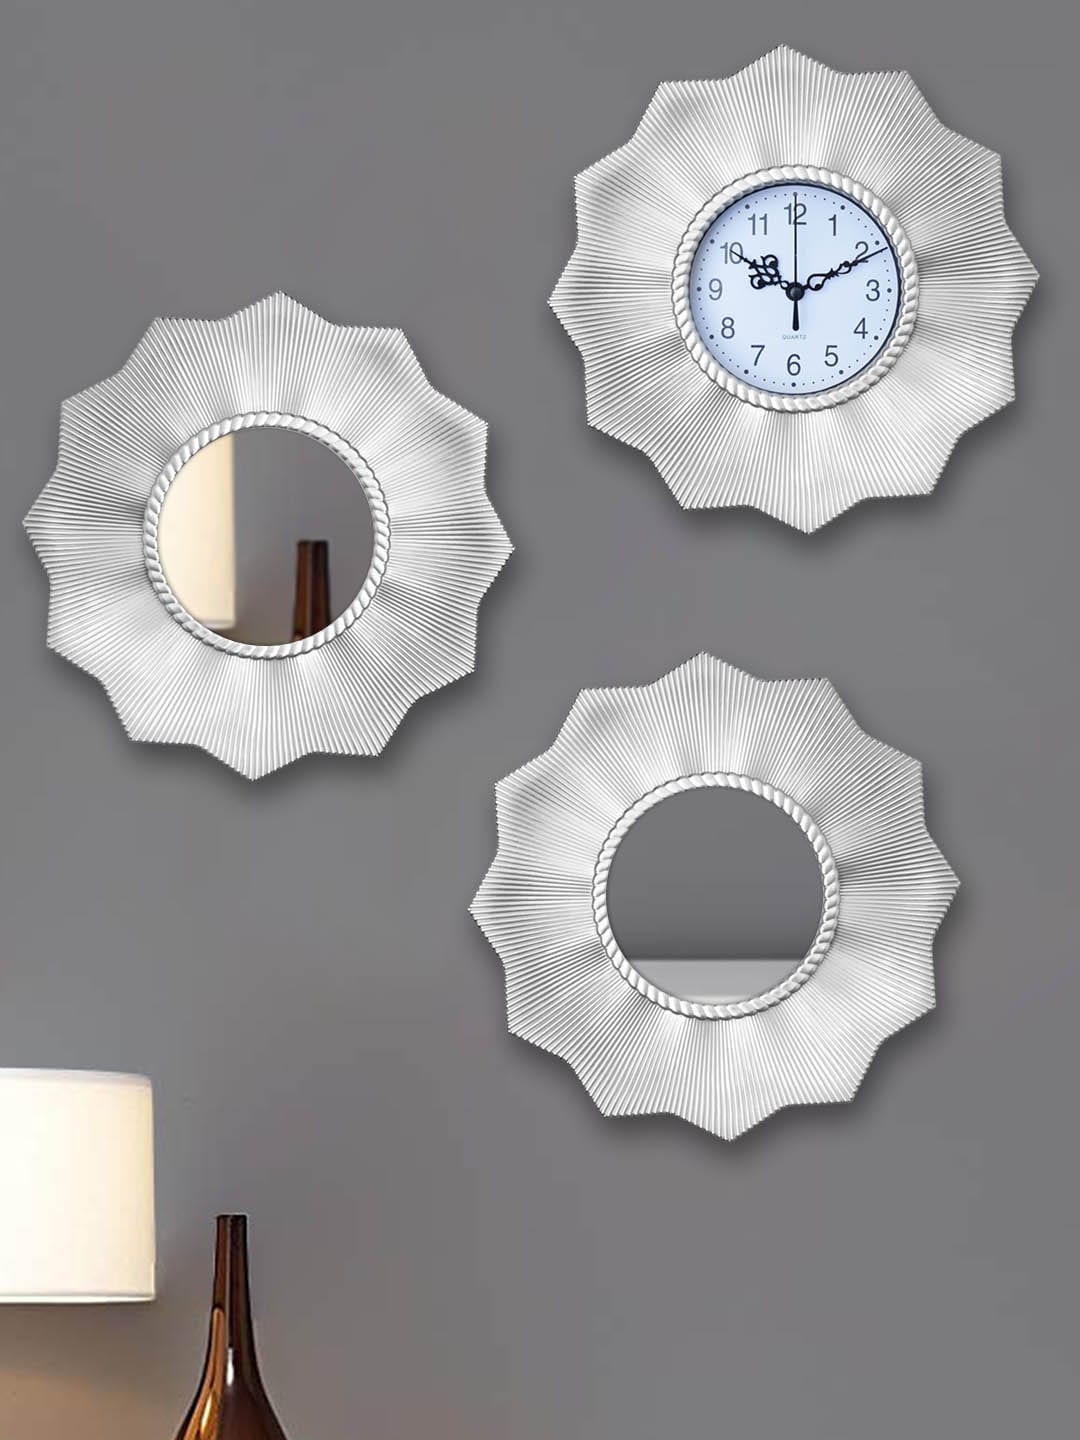 TIED RIBBONS Silver-Toned Set of 3 Floral Contemporary Wall Clock with Wall Mirrors Price in India